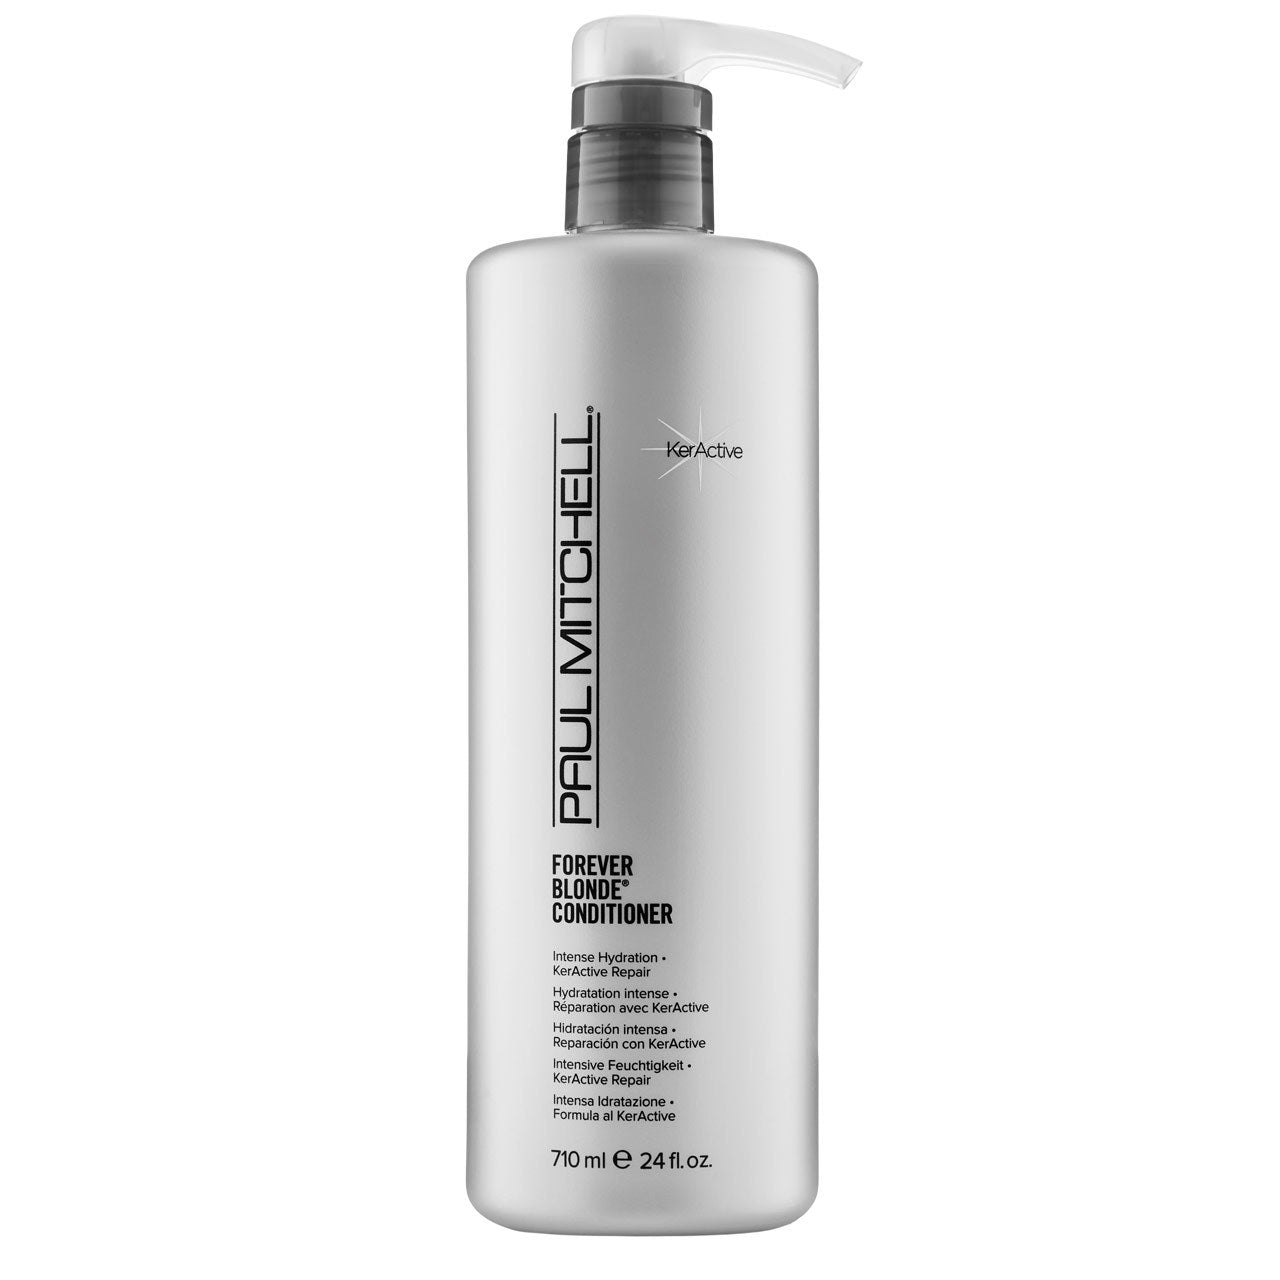 FOREVER BLONDE - Conditioner - Hypnotic Store